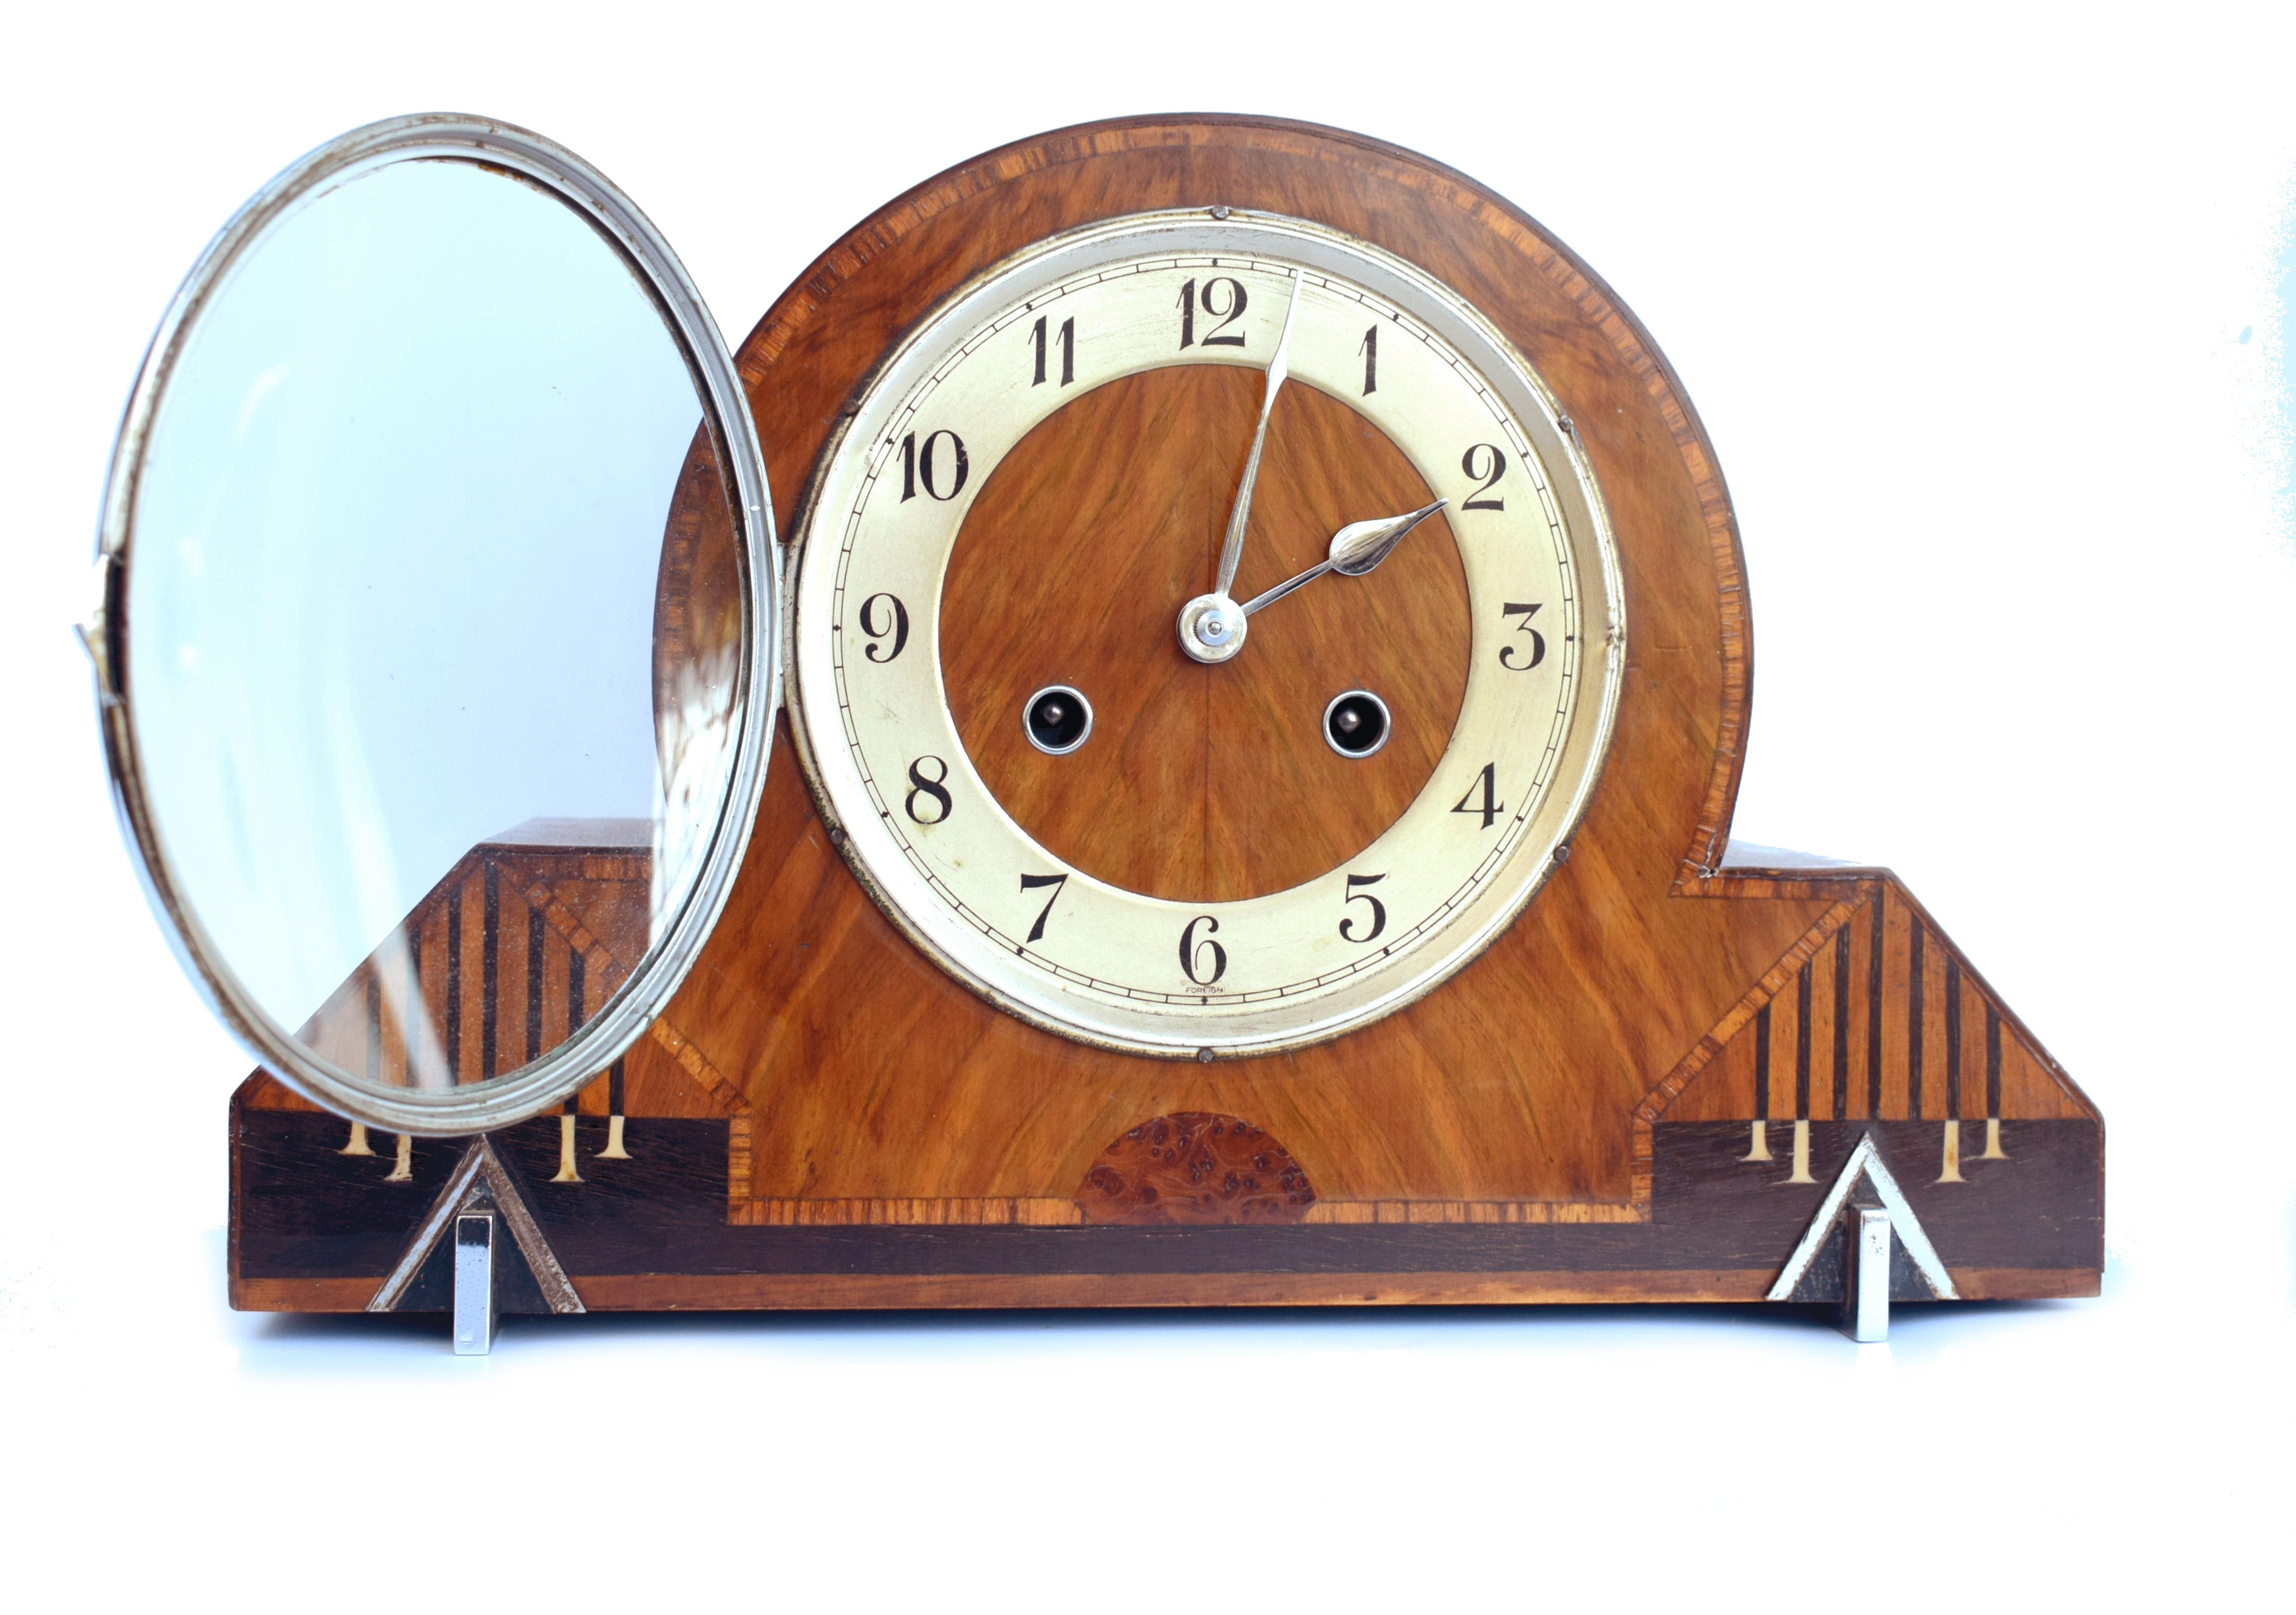 For your consideration is this very good quality and extremely attractive Art Deco mantle clock made in Germany and dating to the 1930's by Thomas Haller. The casing is the real hero of this timepiece, great size with nicely figured walnut veneered